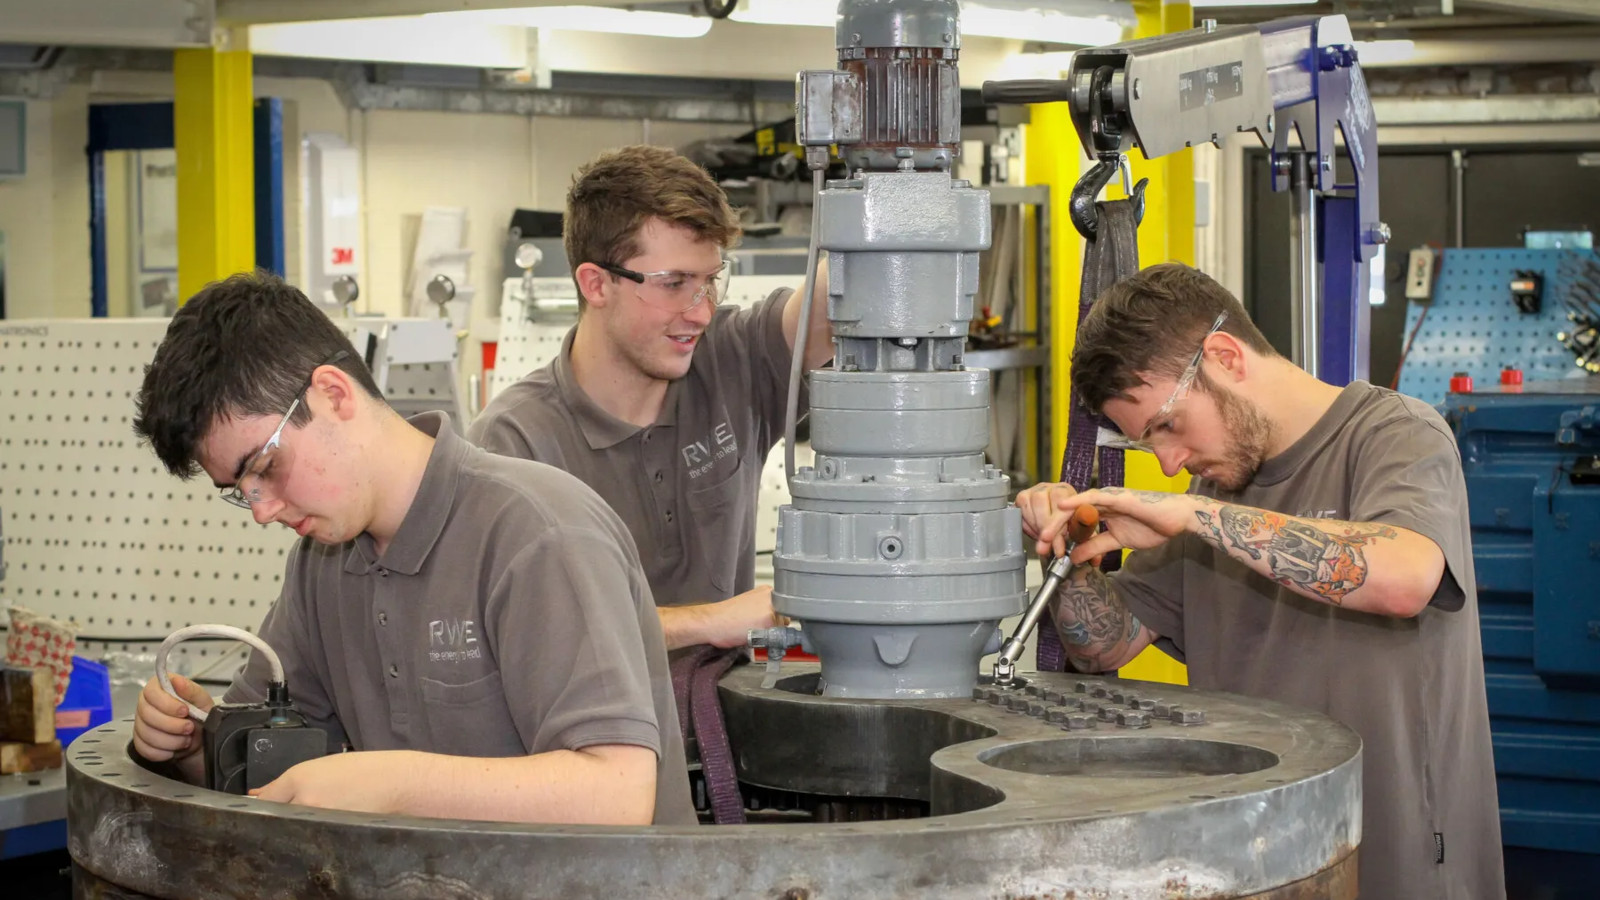 RWE launches new course in North Wales college to upskill green workforce 